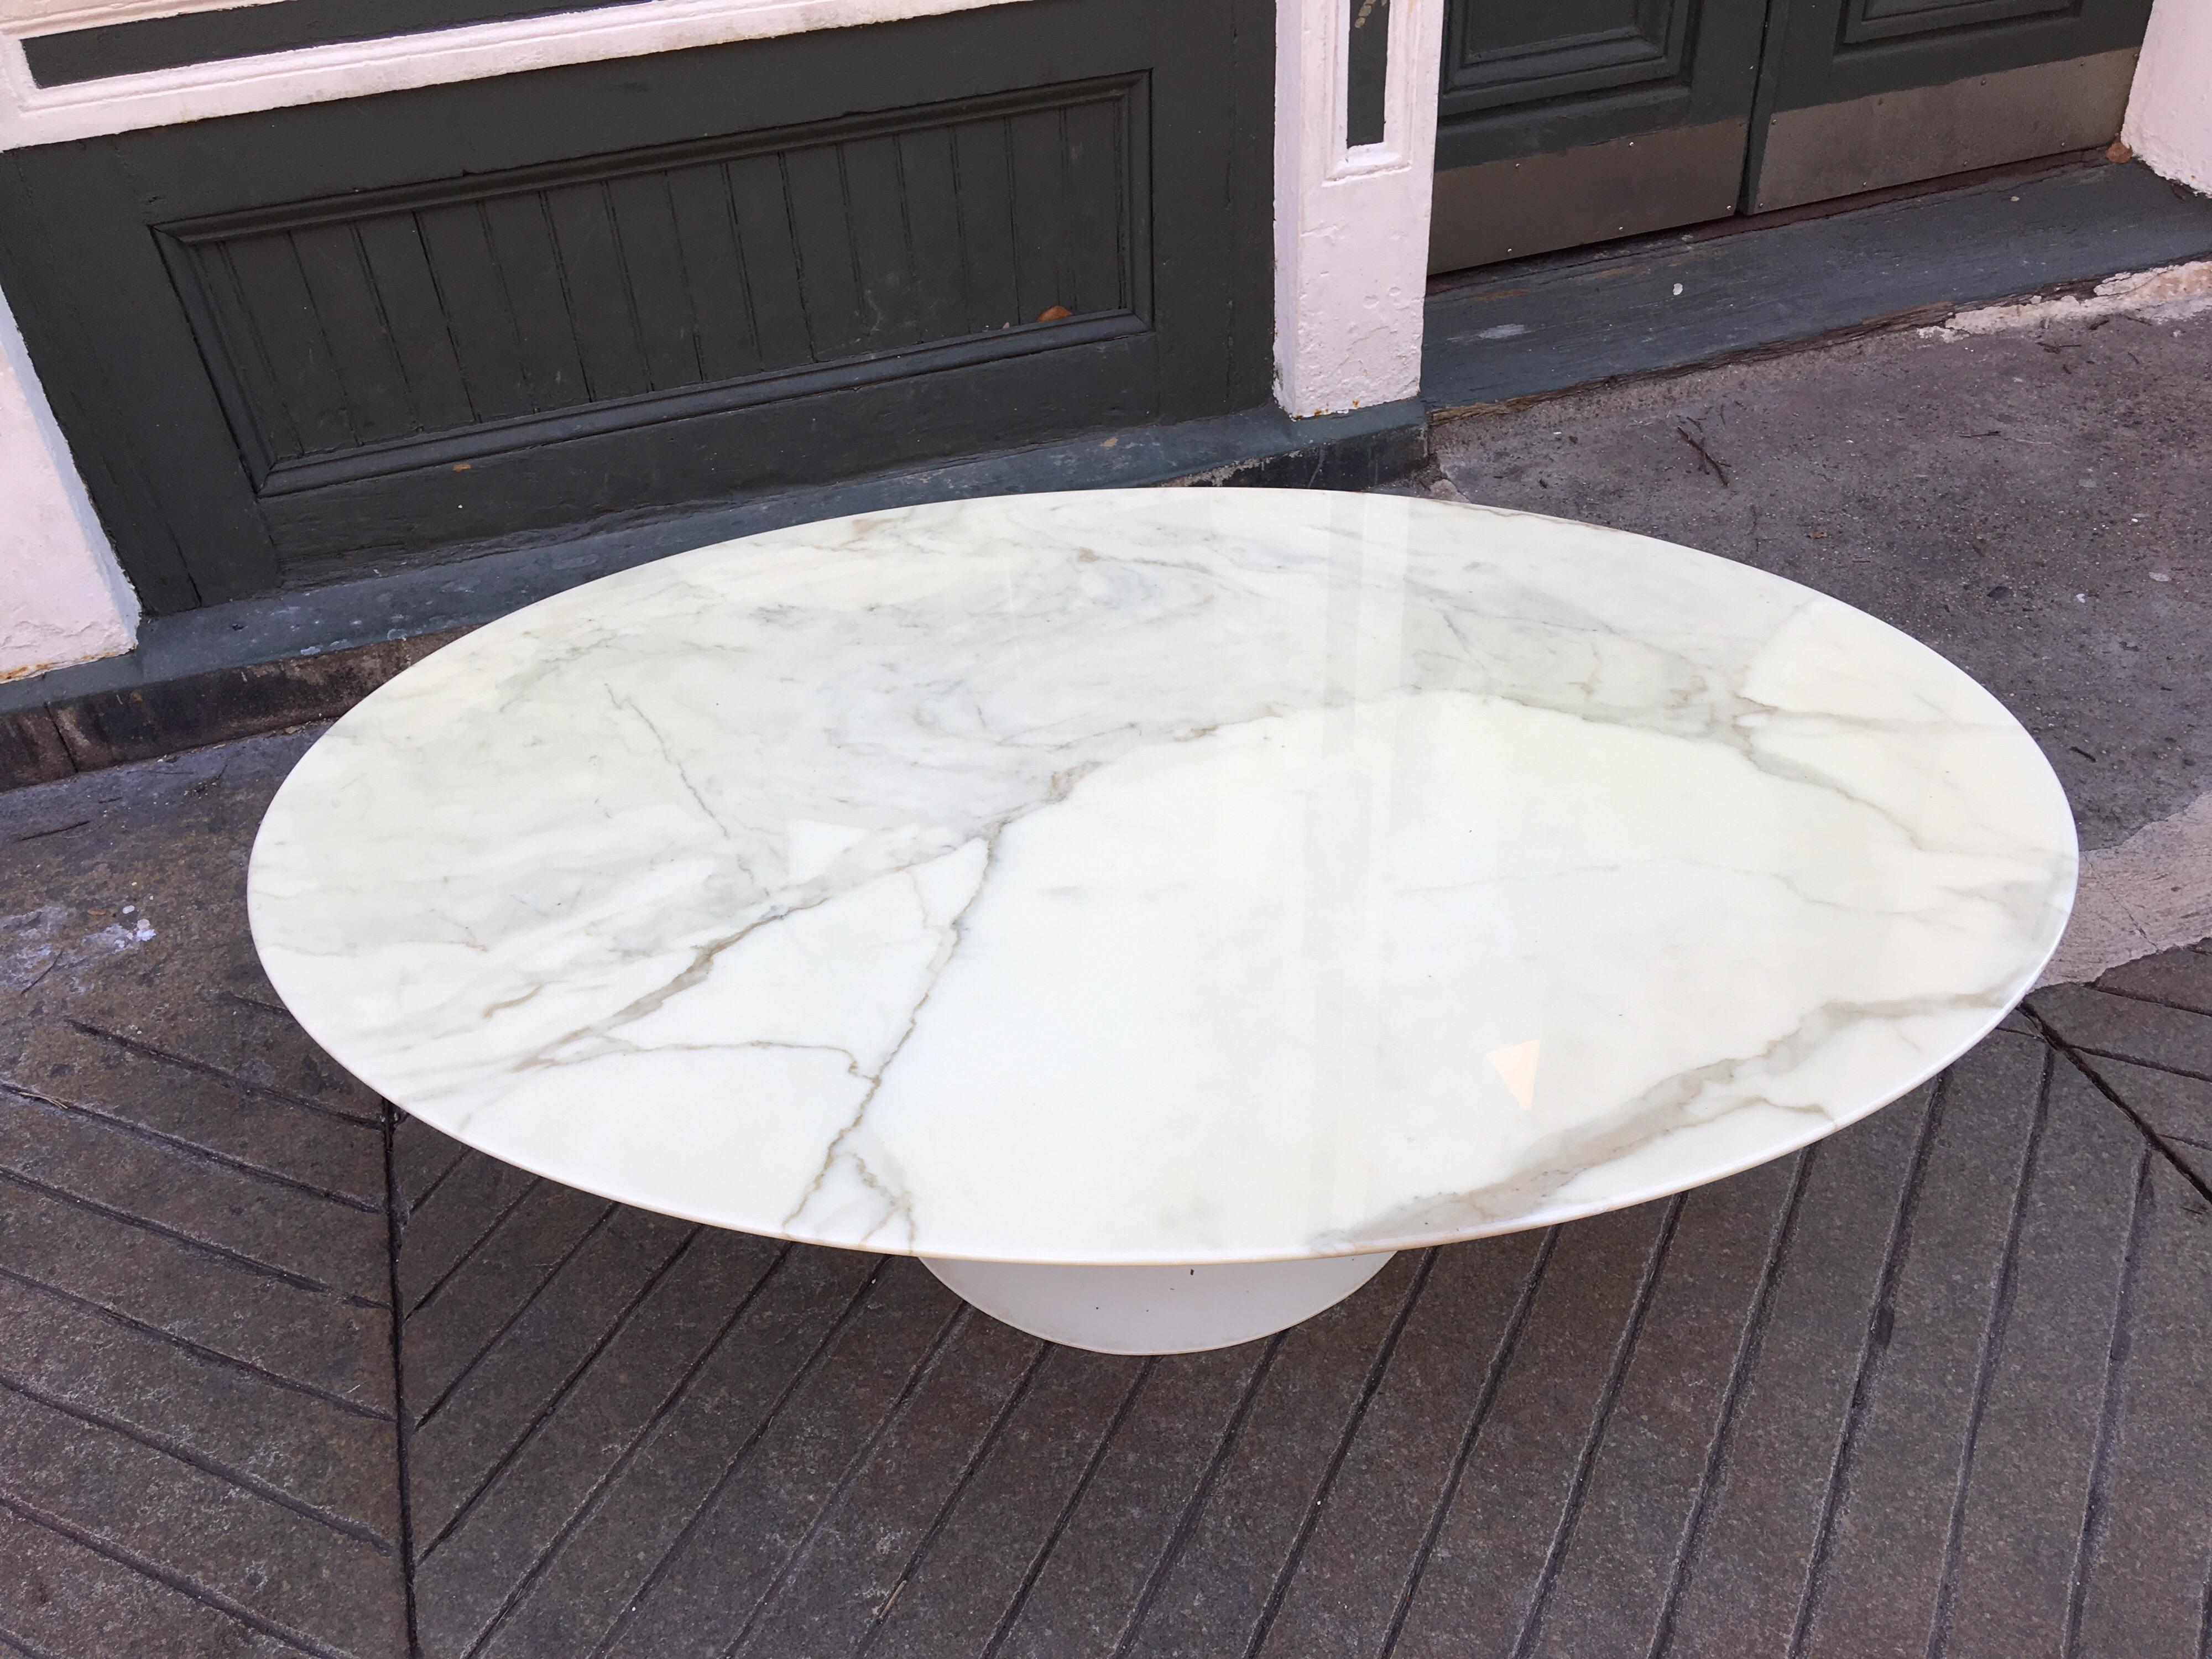 Beautiful original condition Saarinen for Knoll oval marble coffee table from the 1960s.